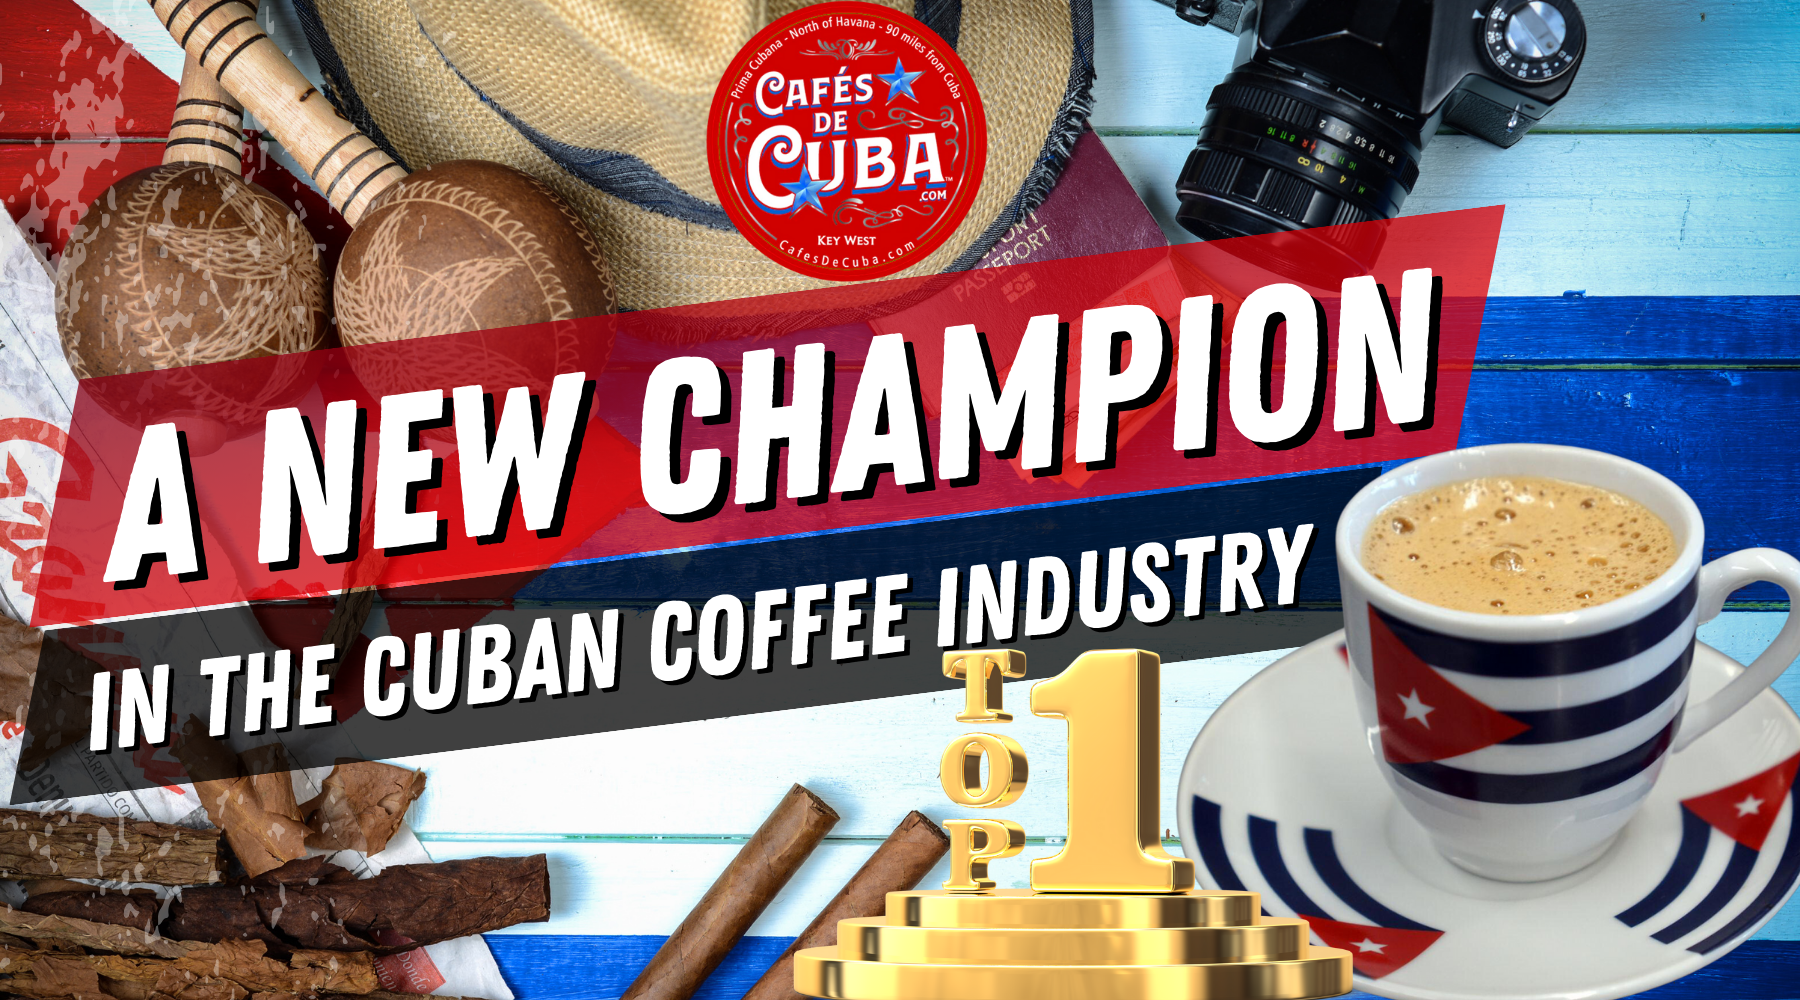 A New Champion in the Cuban Coffee Industry!